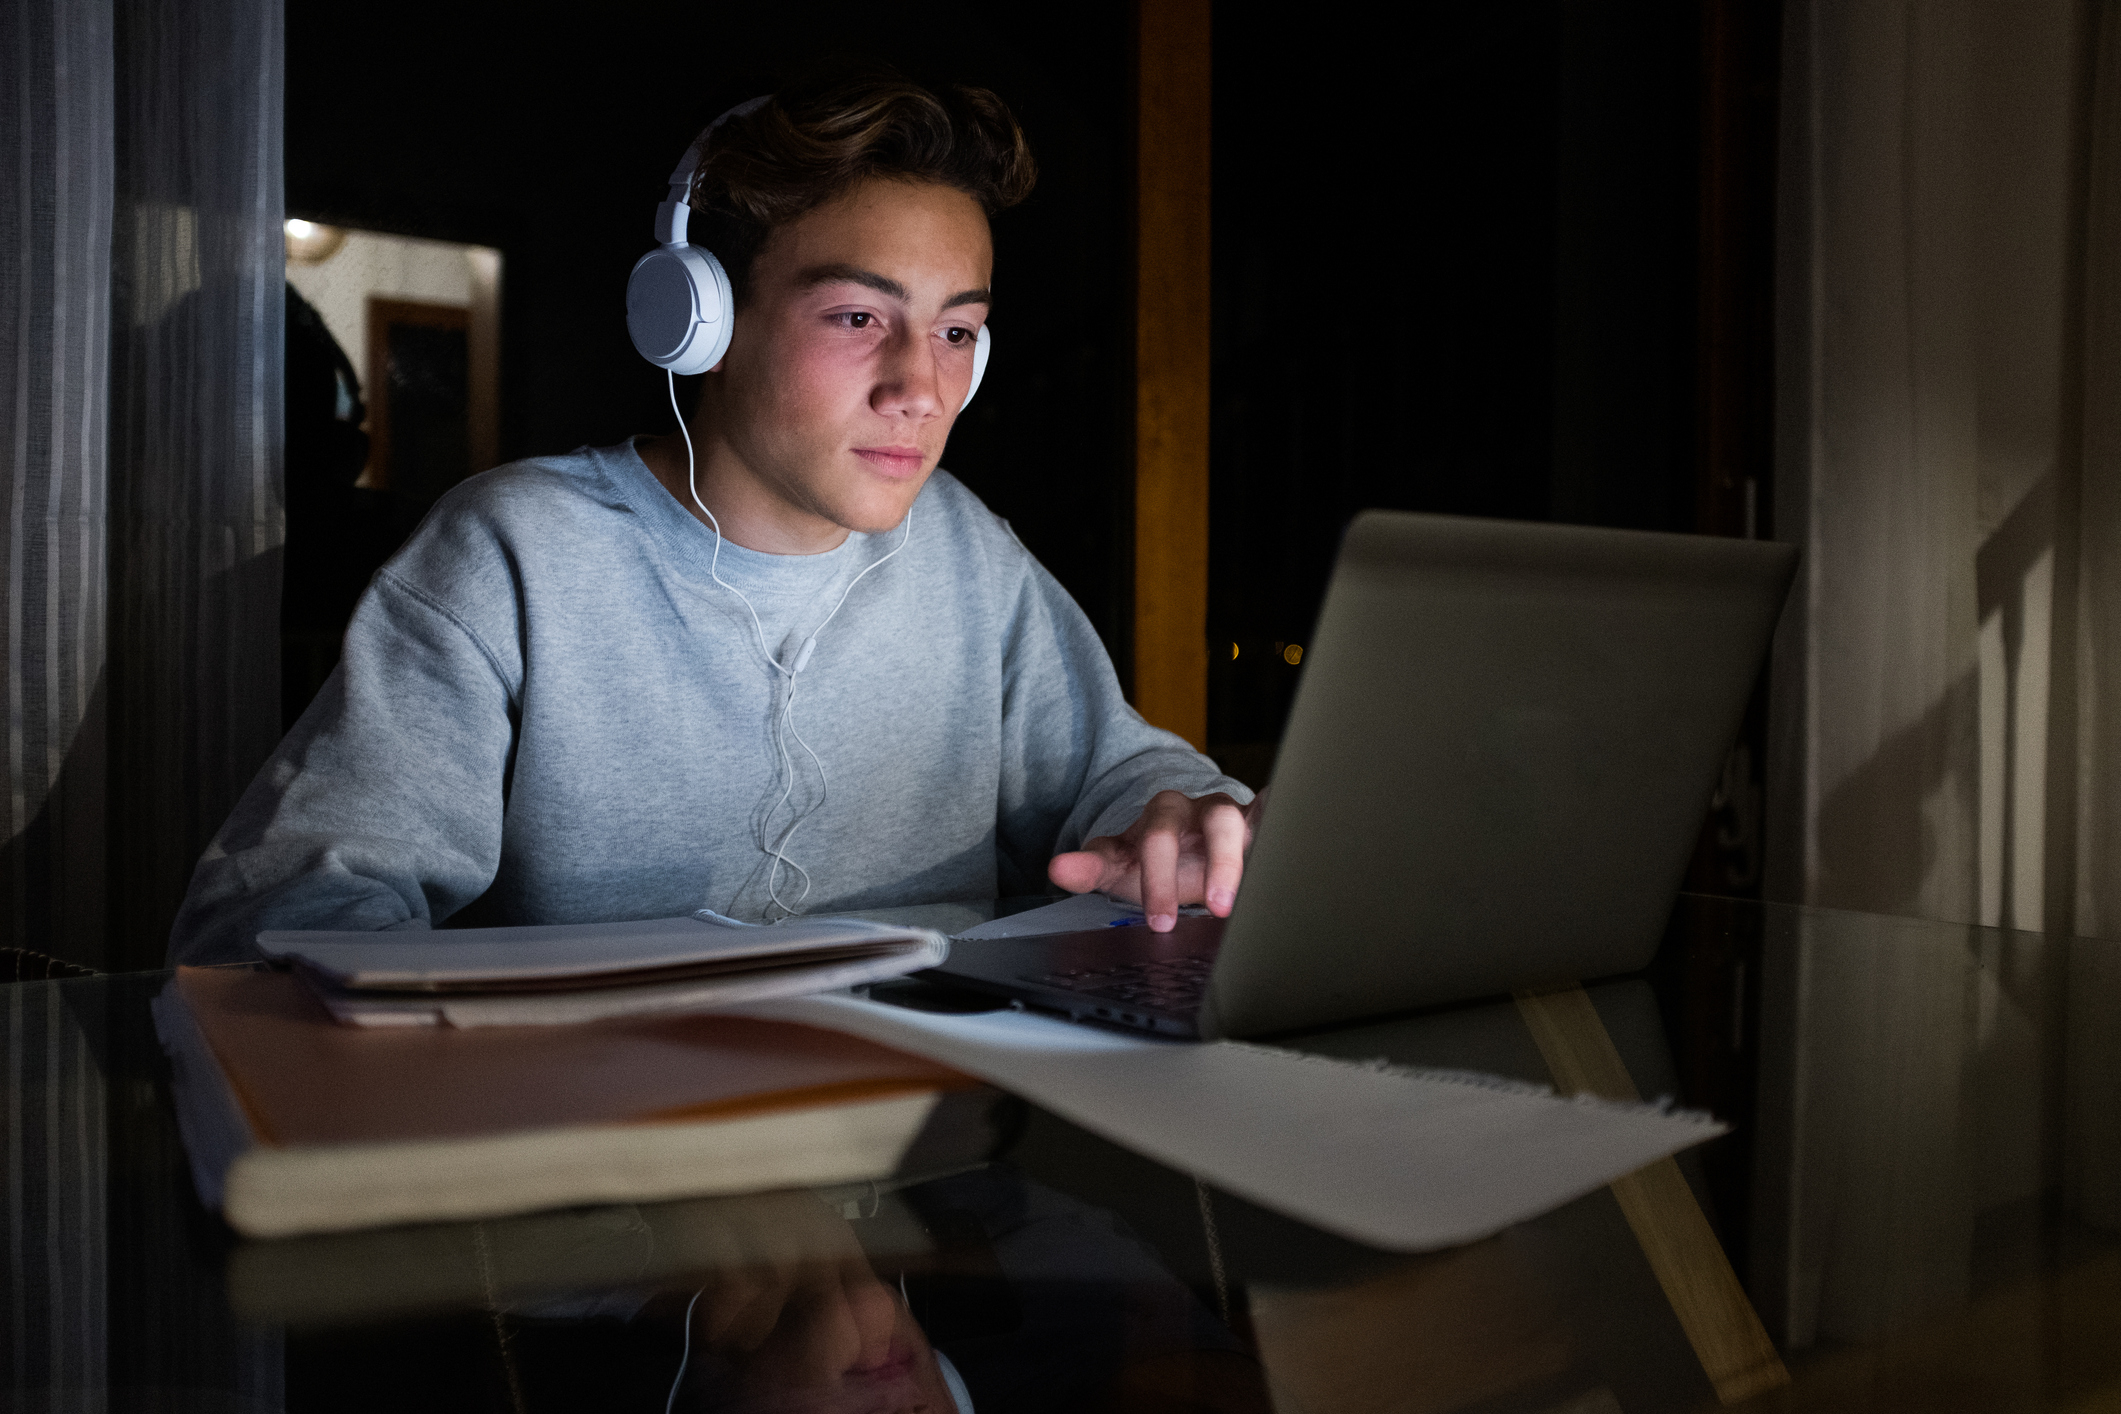 Teenager using his laptop to do homework and listen to music at night